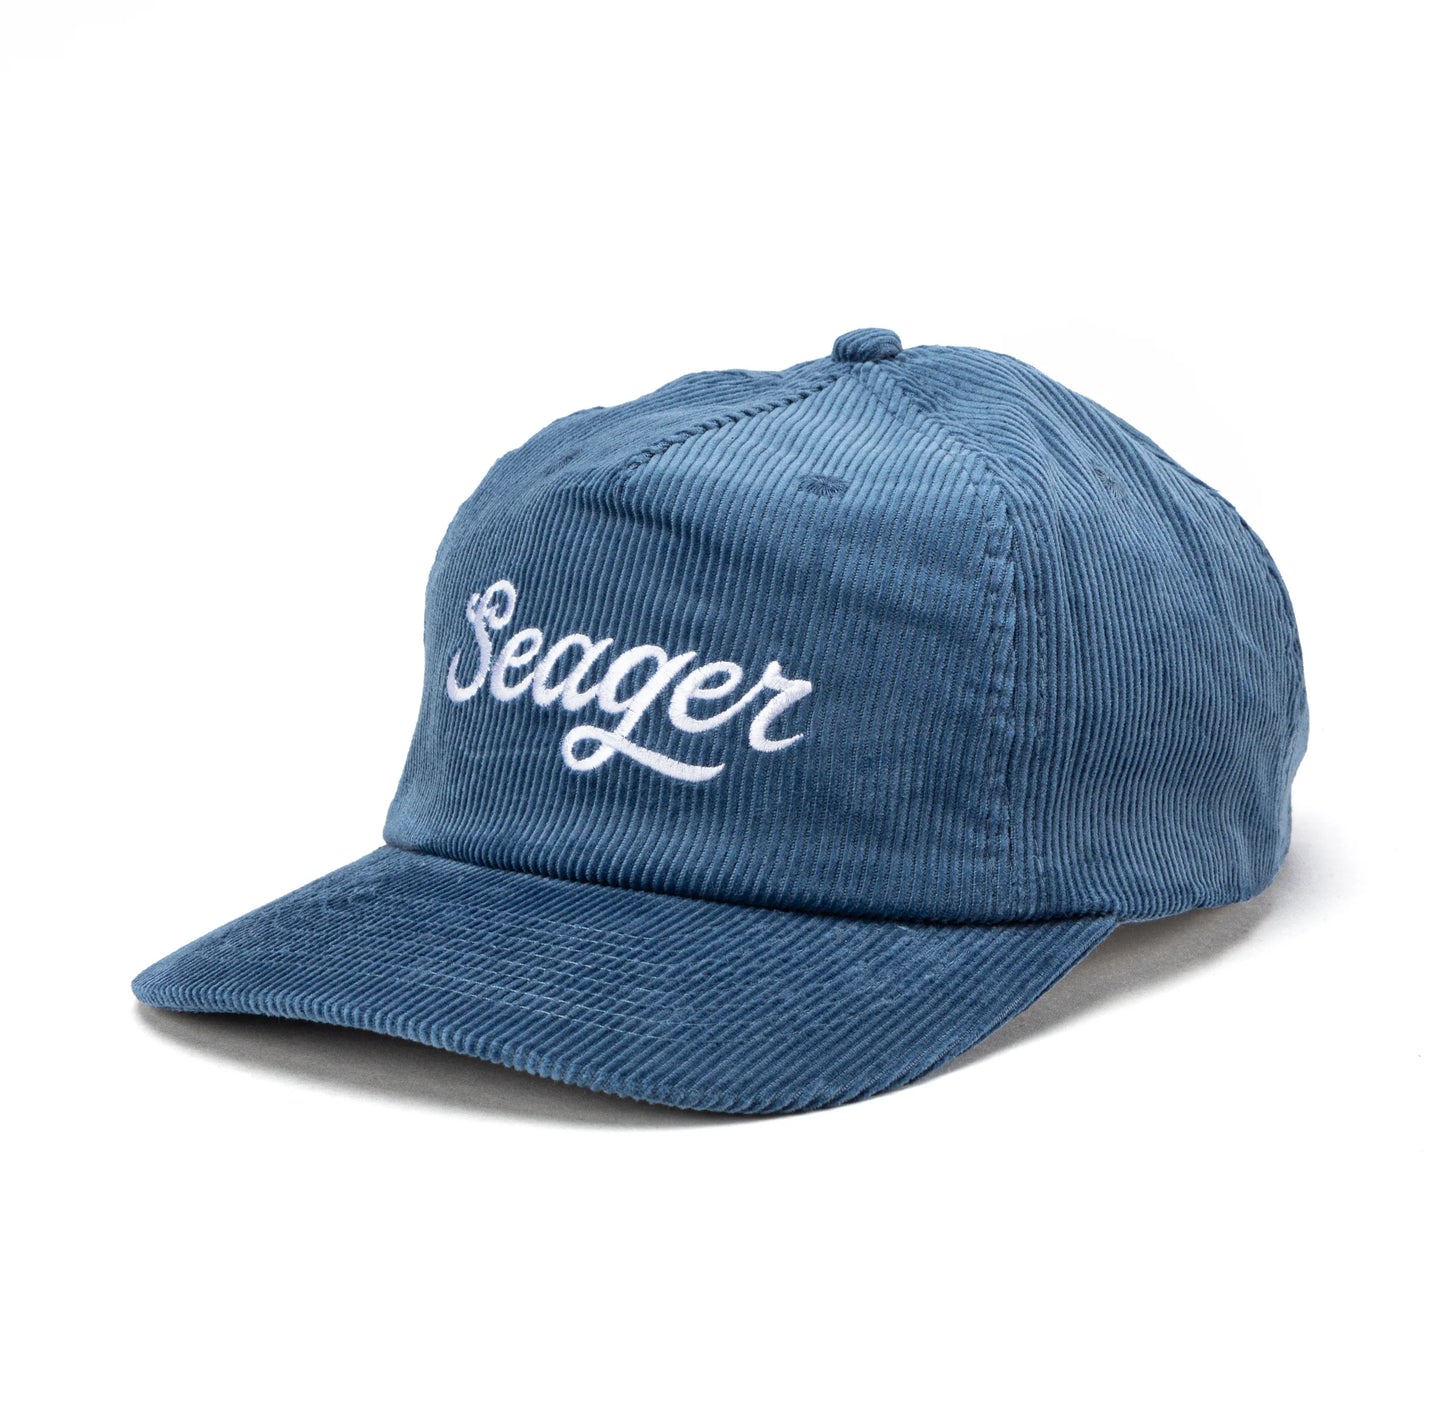 The Big Blue Corduroy Snapback hat by Seager